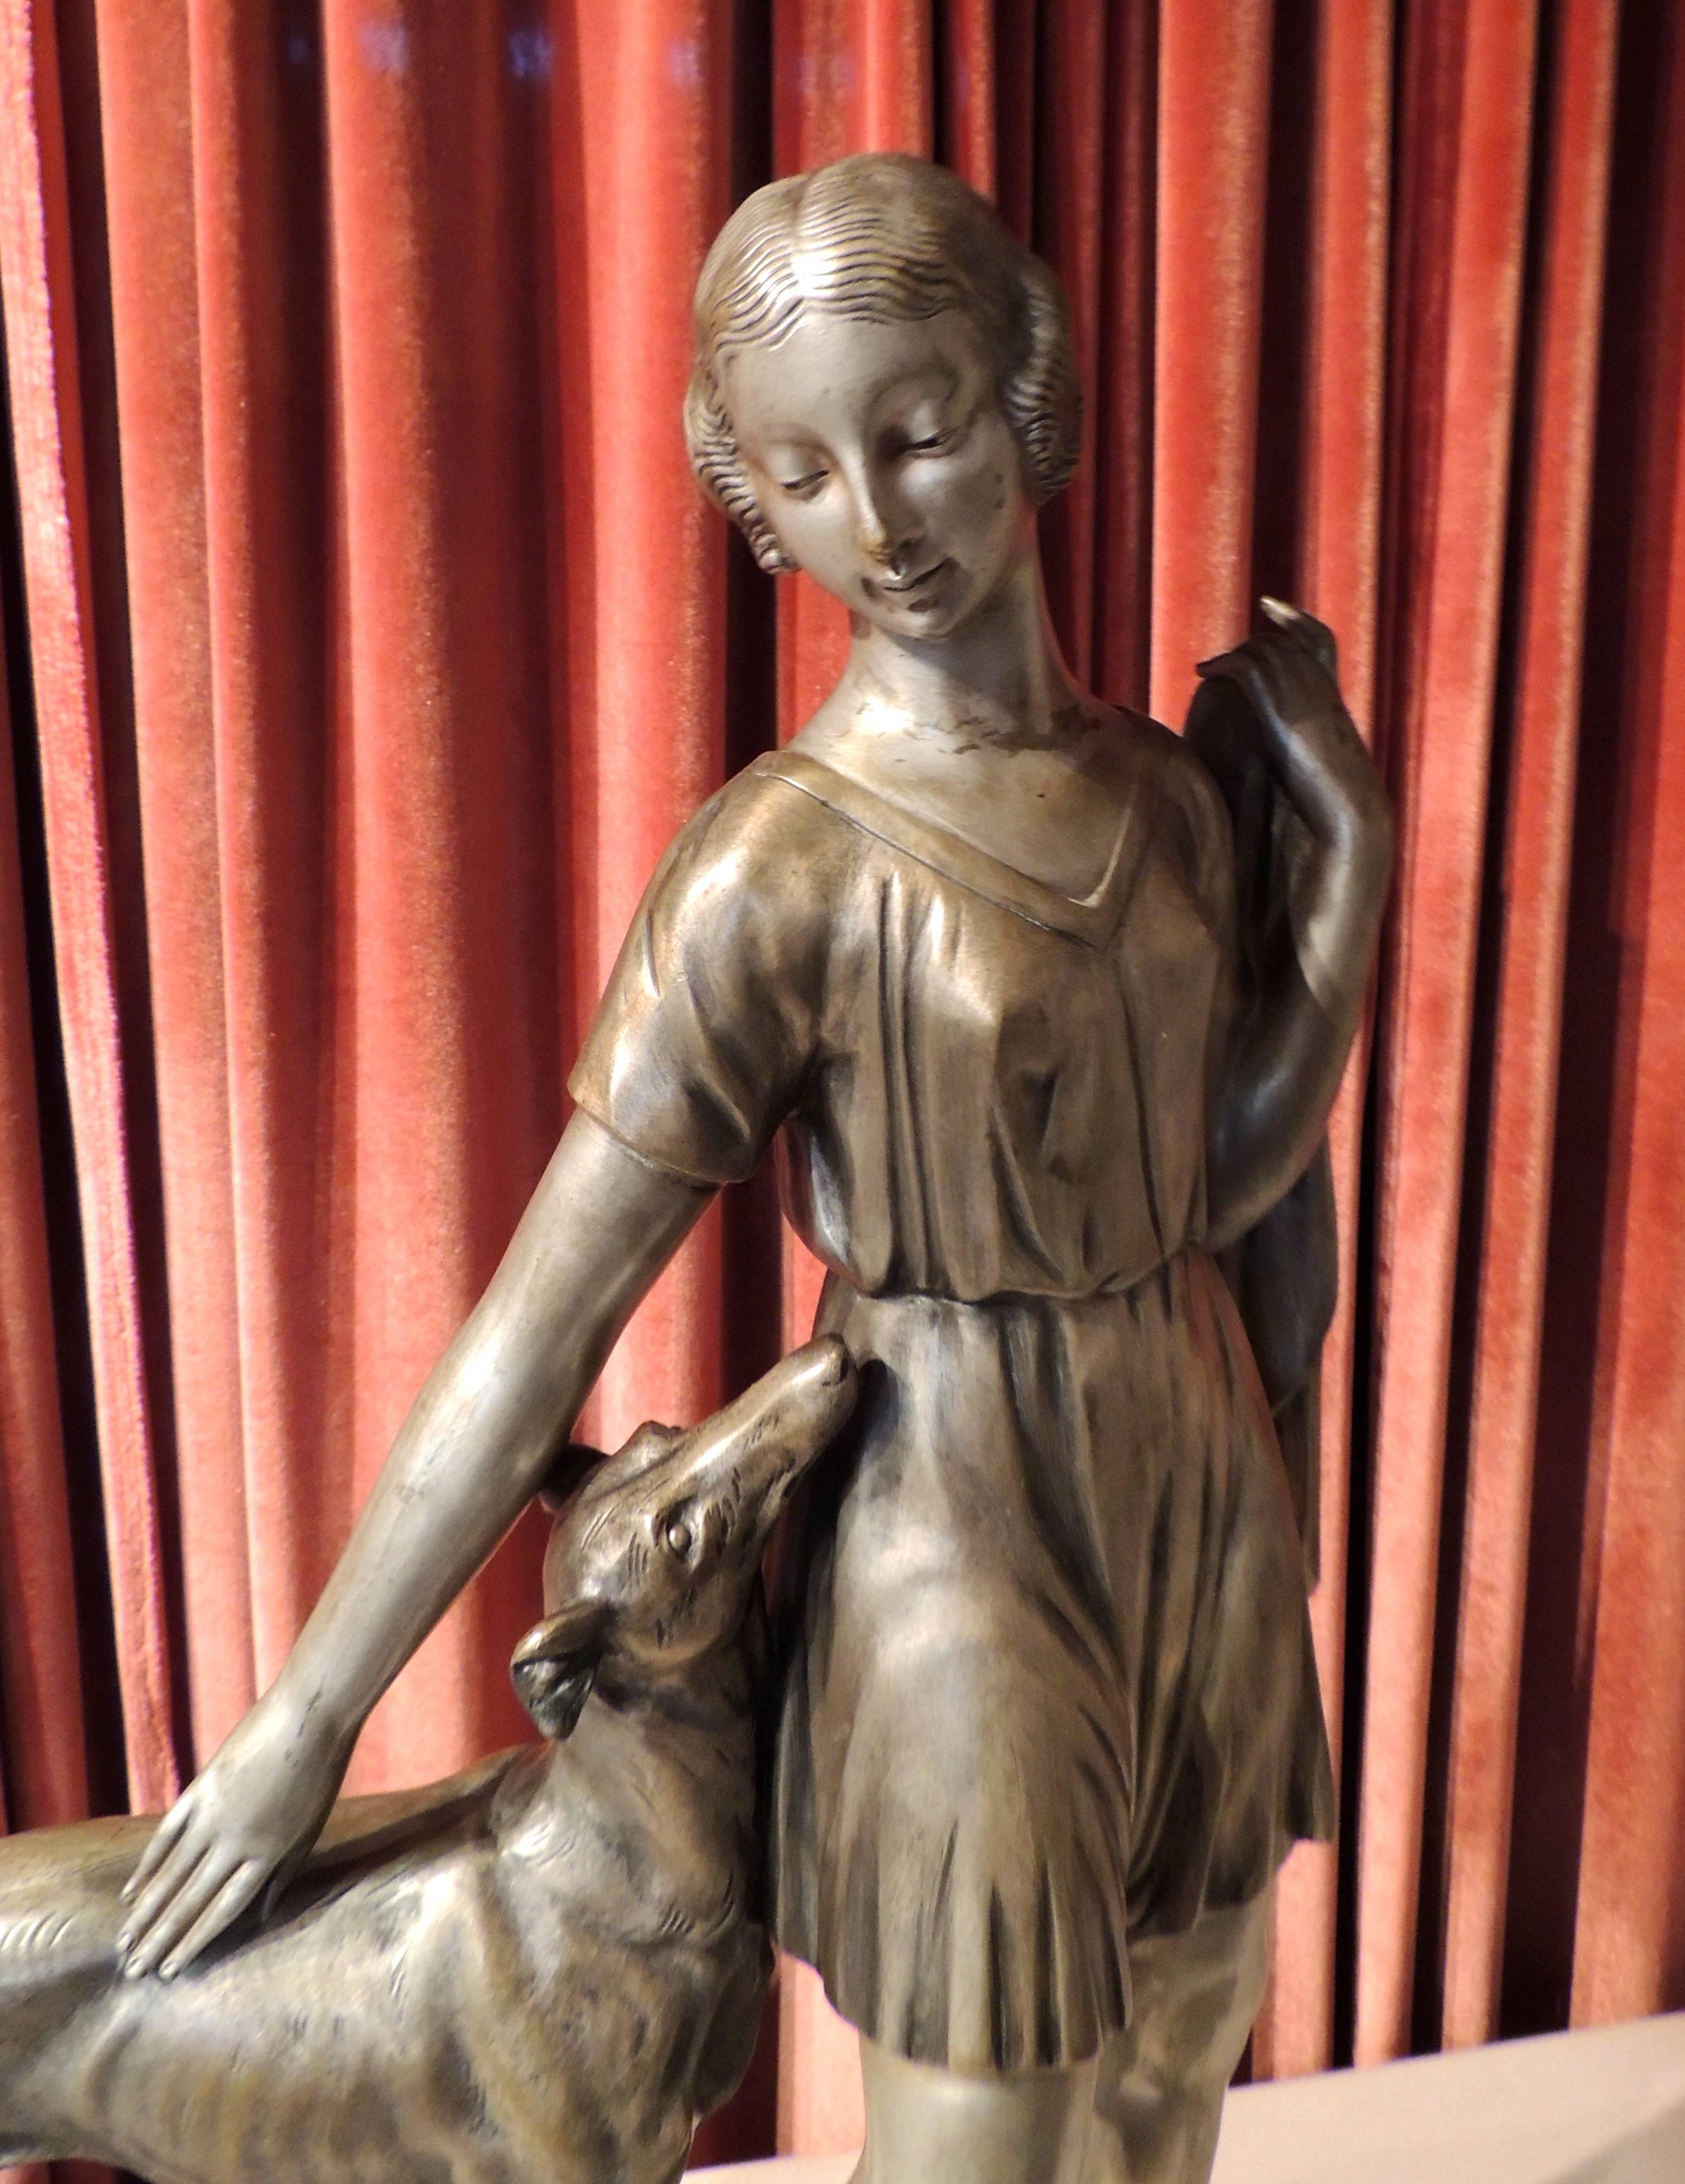 An iconic, large-scale bronze sculpture by Spanish artisit Ignacio Gallo depicting a sleek Art Deco woman…with an even “sleeker” Greyhound dog looking adoringly at his owner. It is a graceful pose, beautifully rendered. The base is a “sandwich” of